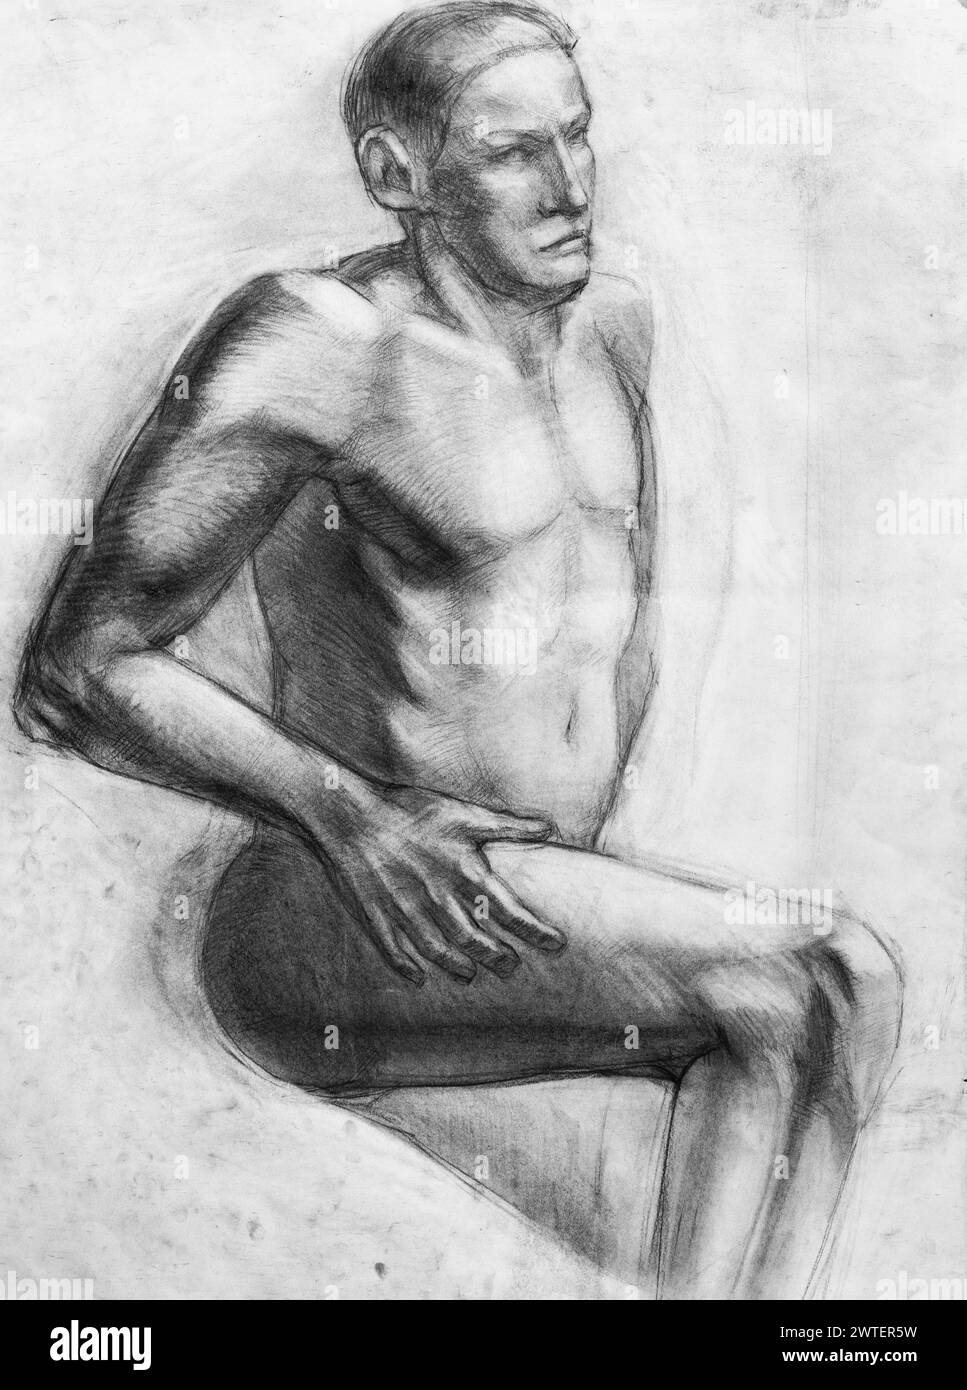 educational portrait of seated nude model drawn by hand with graphite pencil on white paper Stock Photo